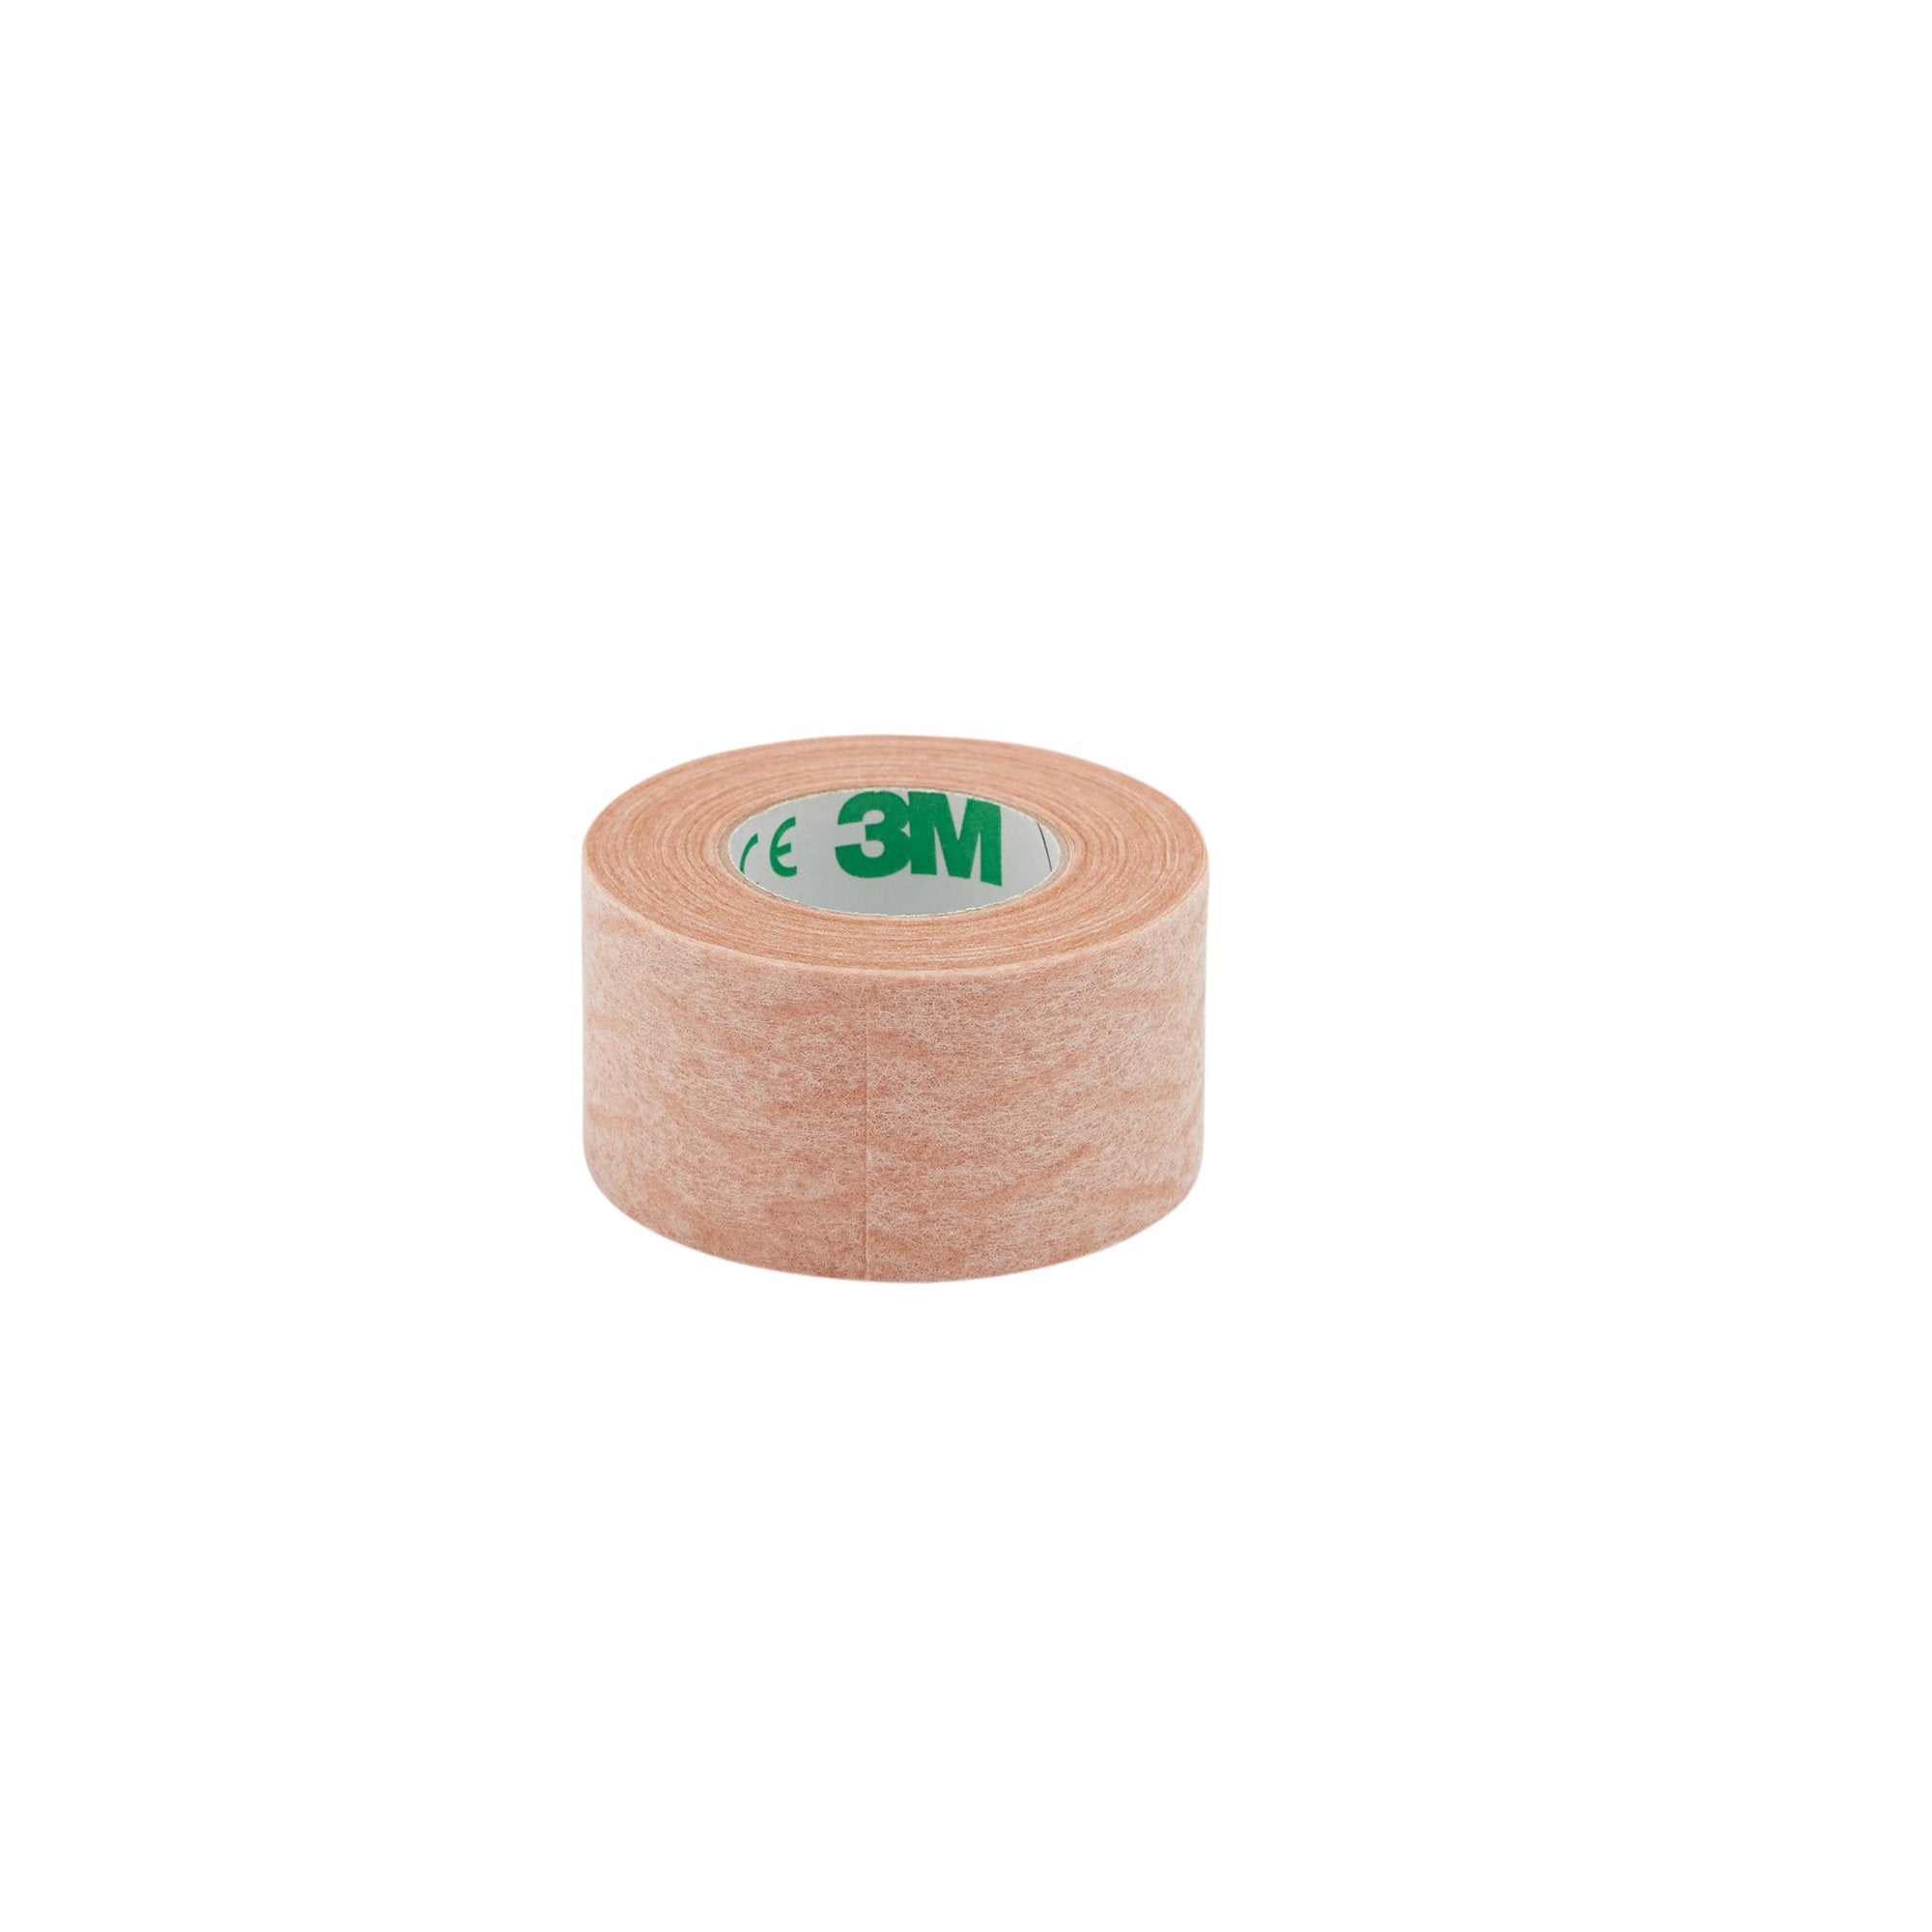 3M 1533-1 TAPE MICROPORE 1X10YD Box of 12 - Oz Medical Supply